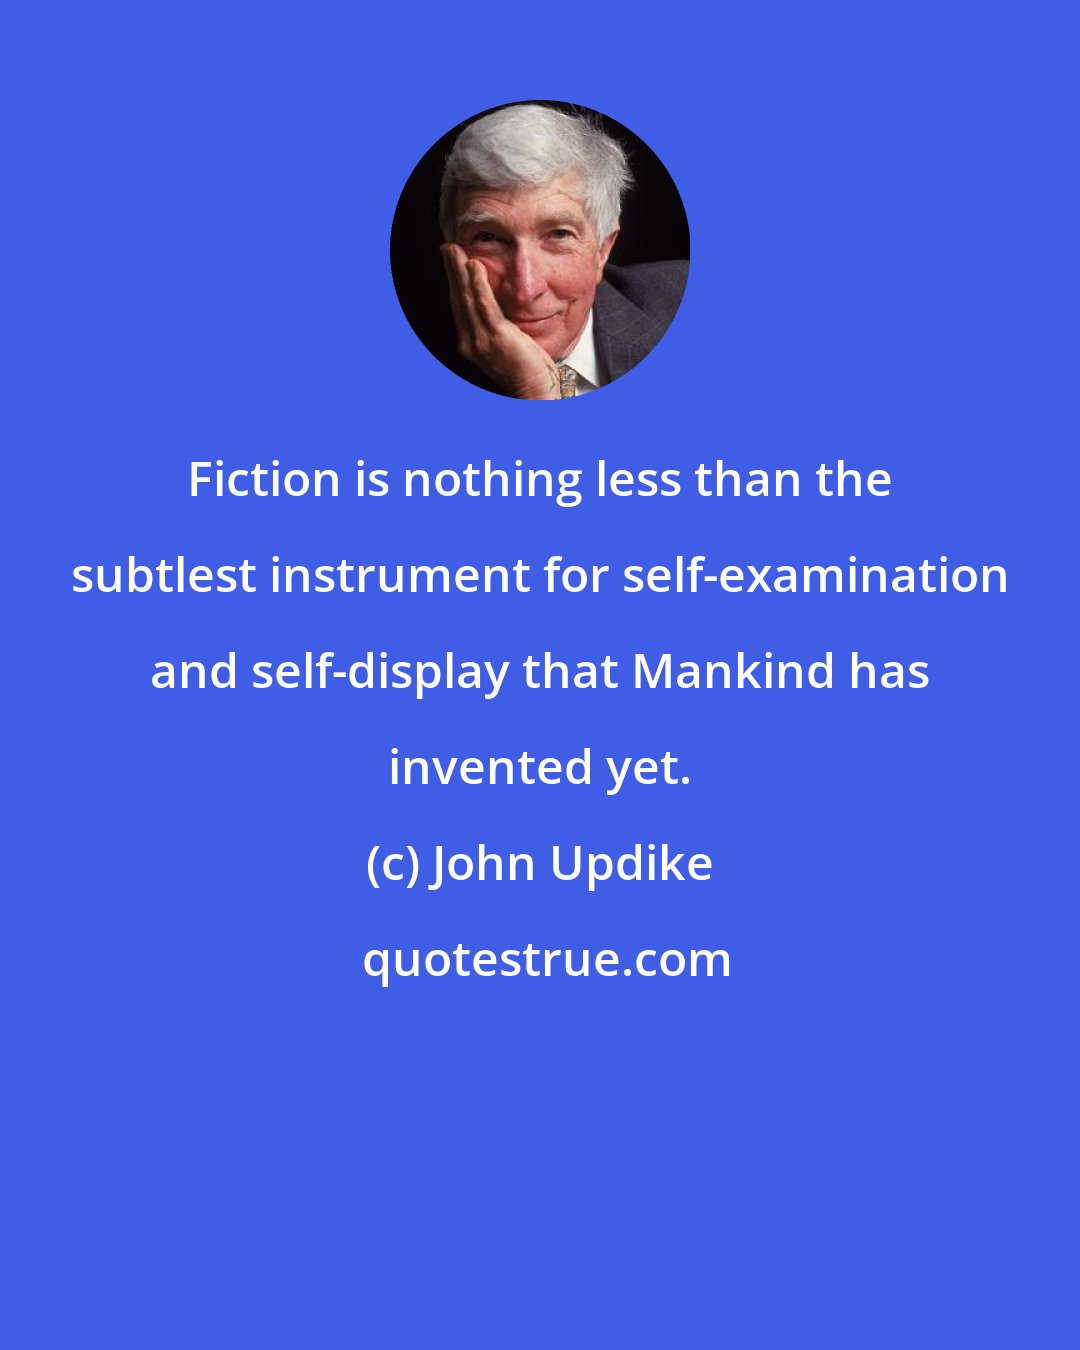 John Updike: Fiction is nothing less than the subtlest instrument for self-examination and self-display that Mankind has invented yet.